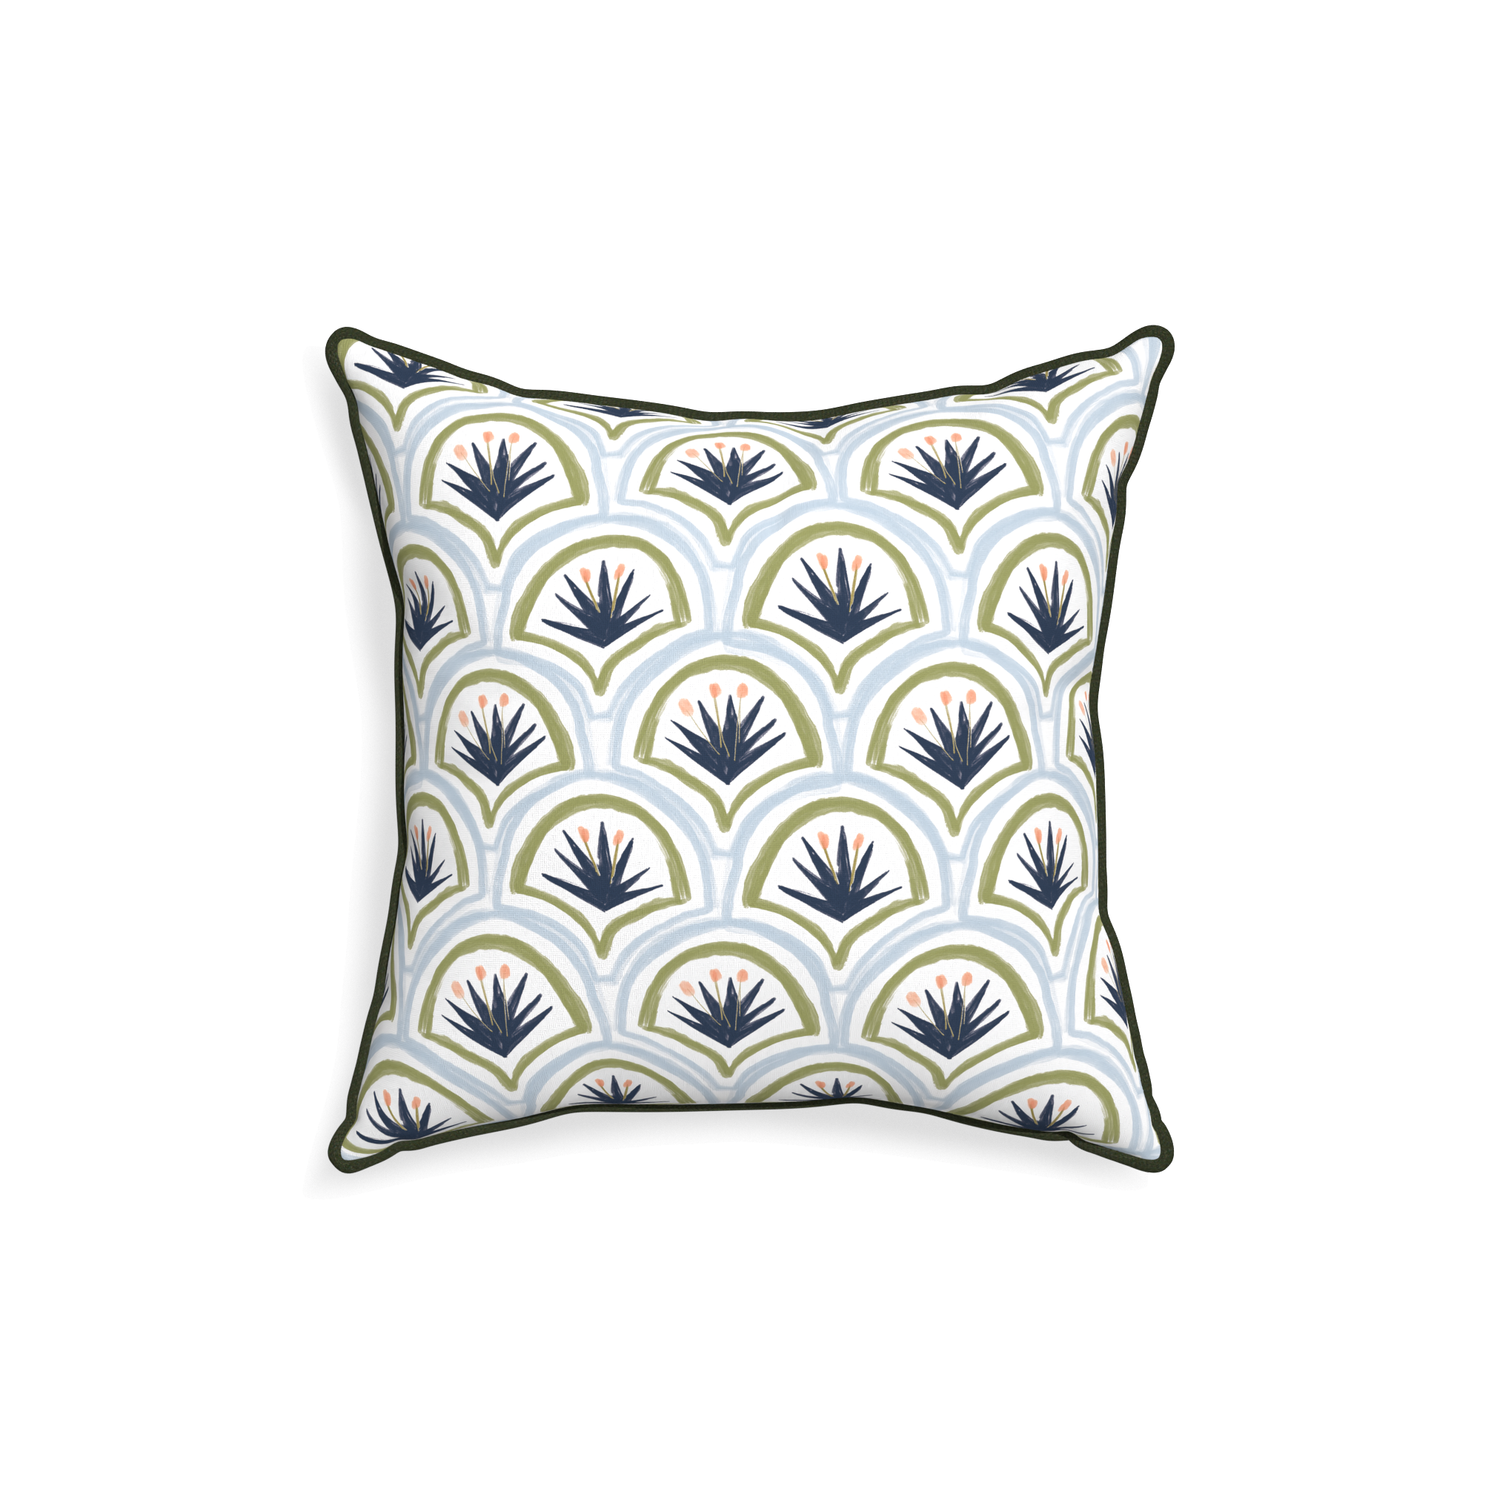 18-square thatcher midnight custom art deco palm patternpillow with f piping on white background